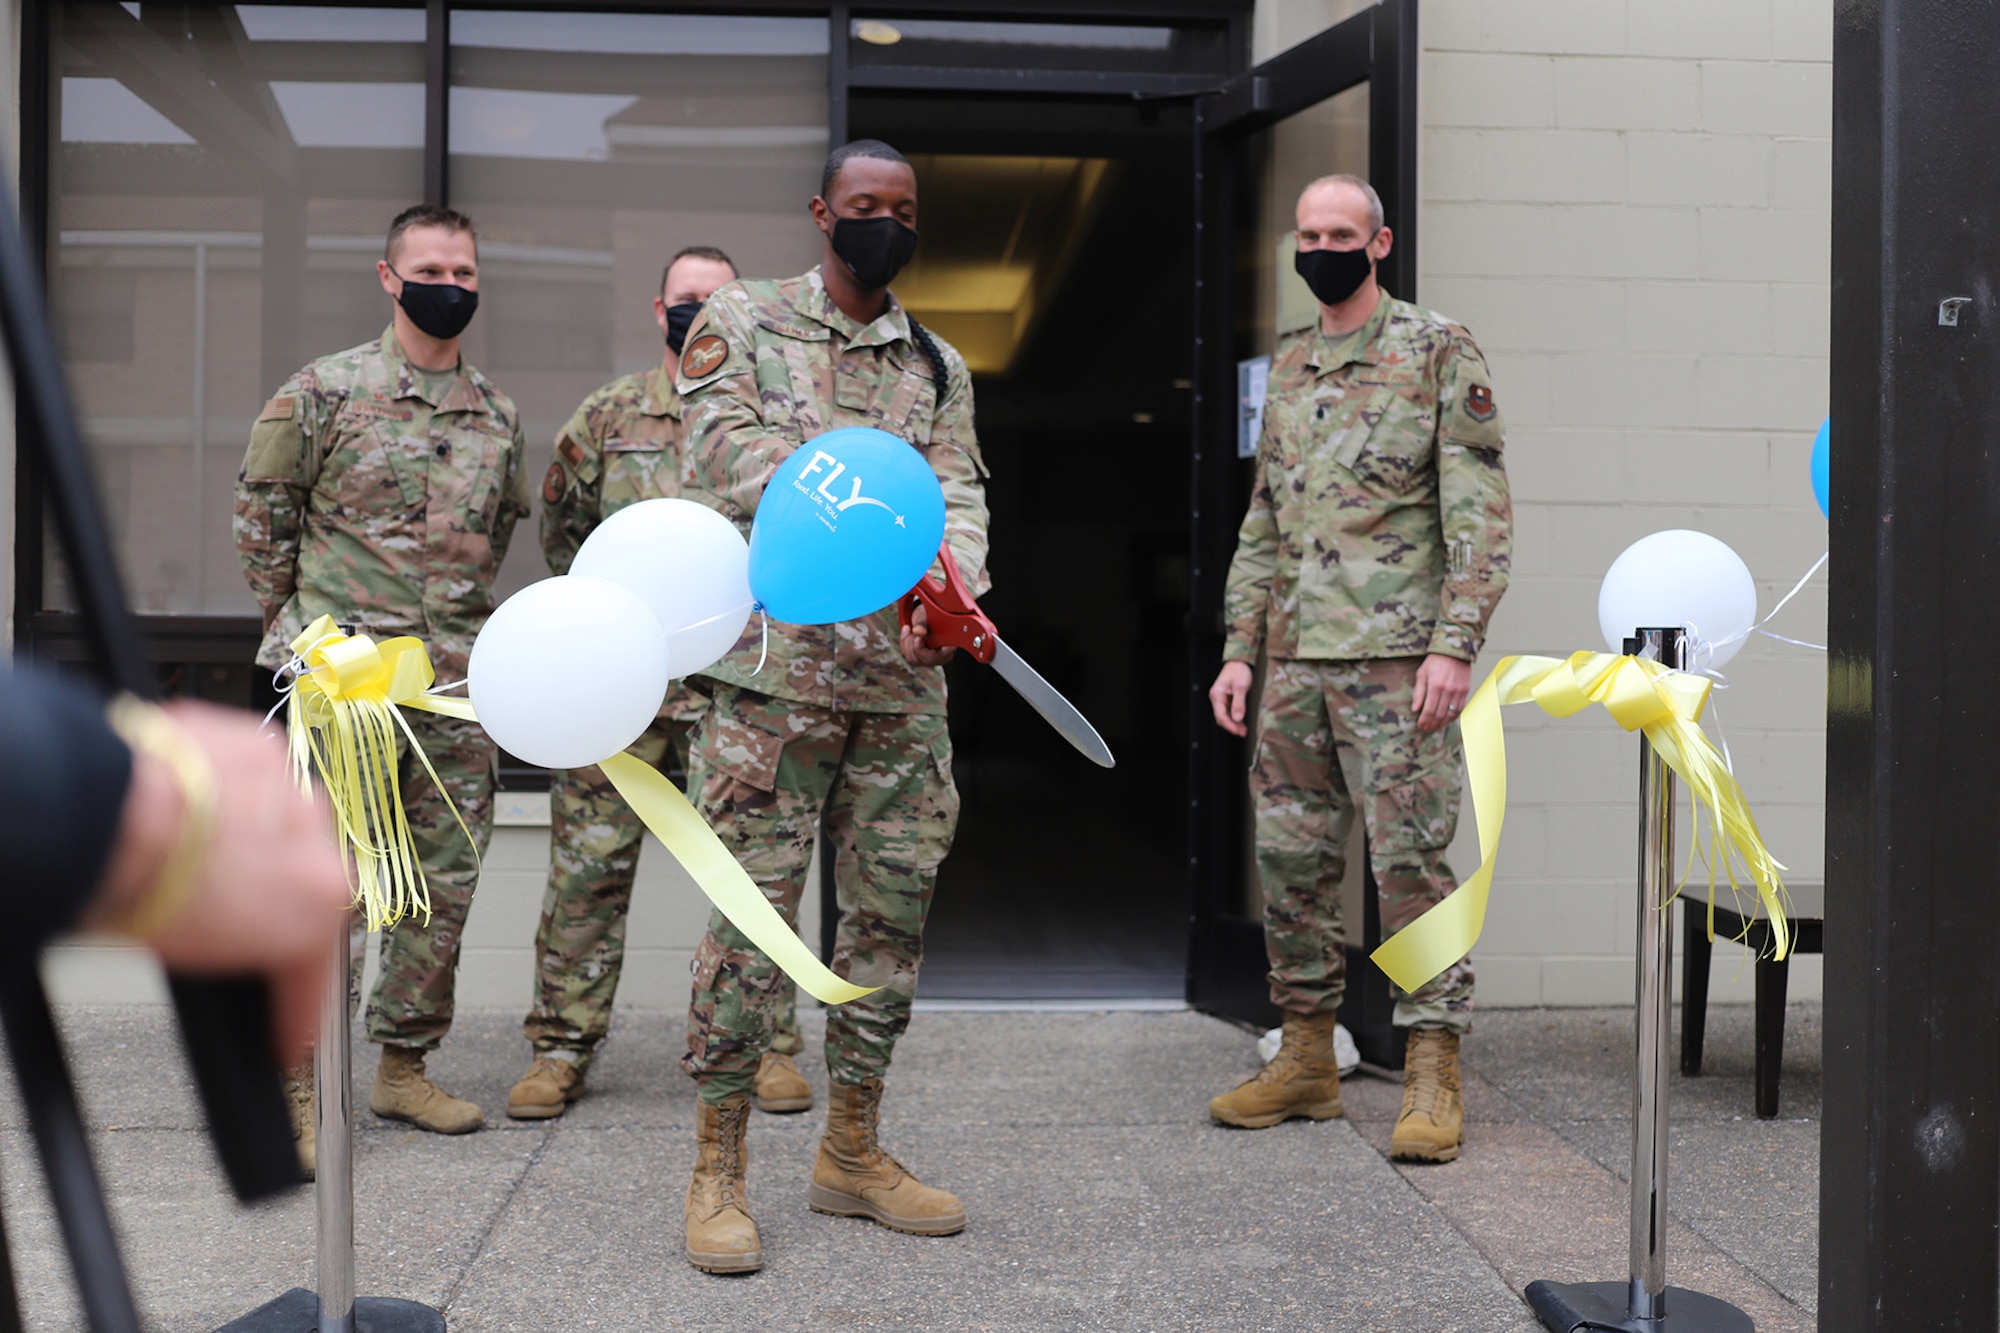 A 381st Training Group student cuts the ribbon to officially reopen The Beachcombers dining facility at Vandenberg AFB, California, Aug. 6, 2020.